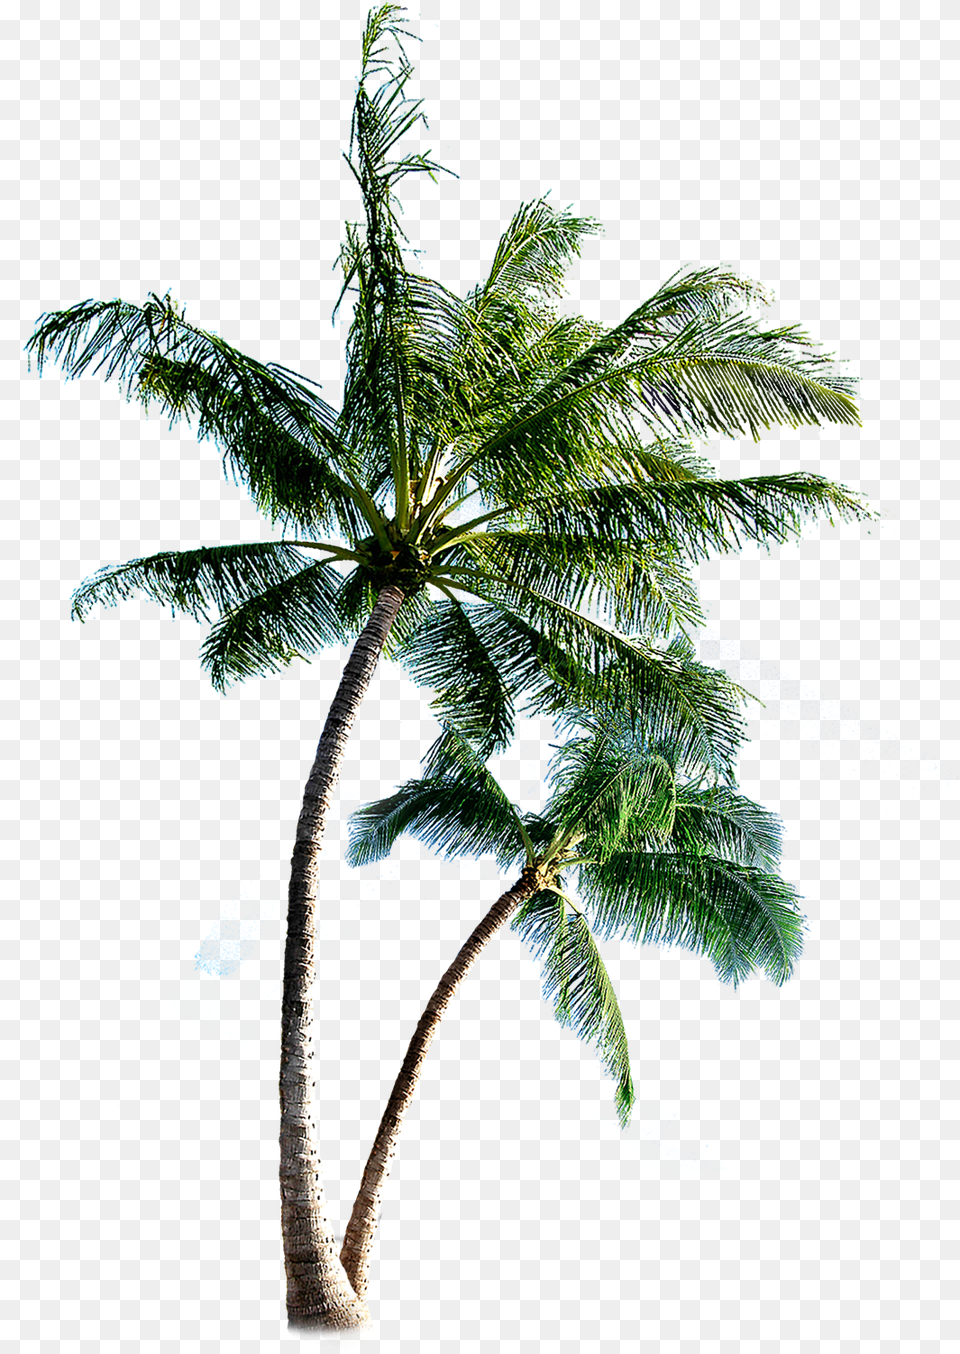 Palm Tree Transparent Background Coconut Tree, Palm Tree, Plant, Leaf, Summer Png